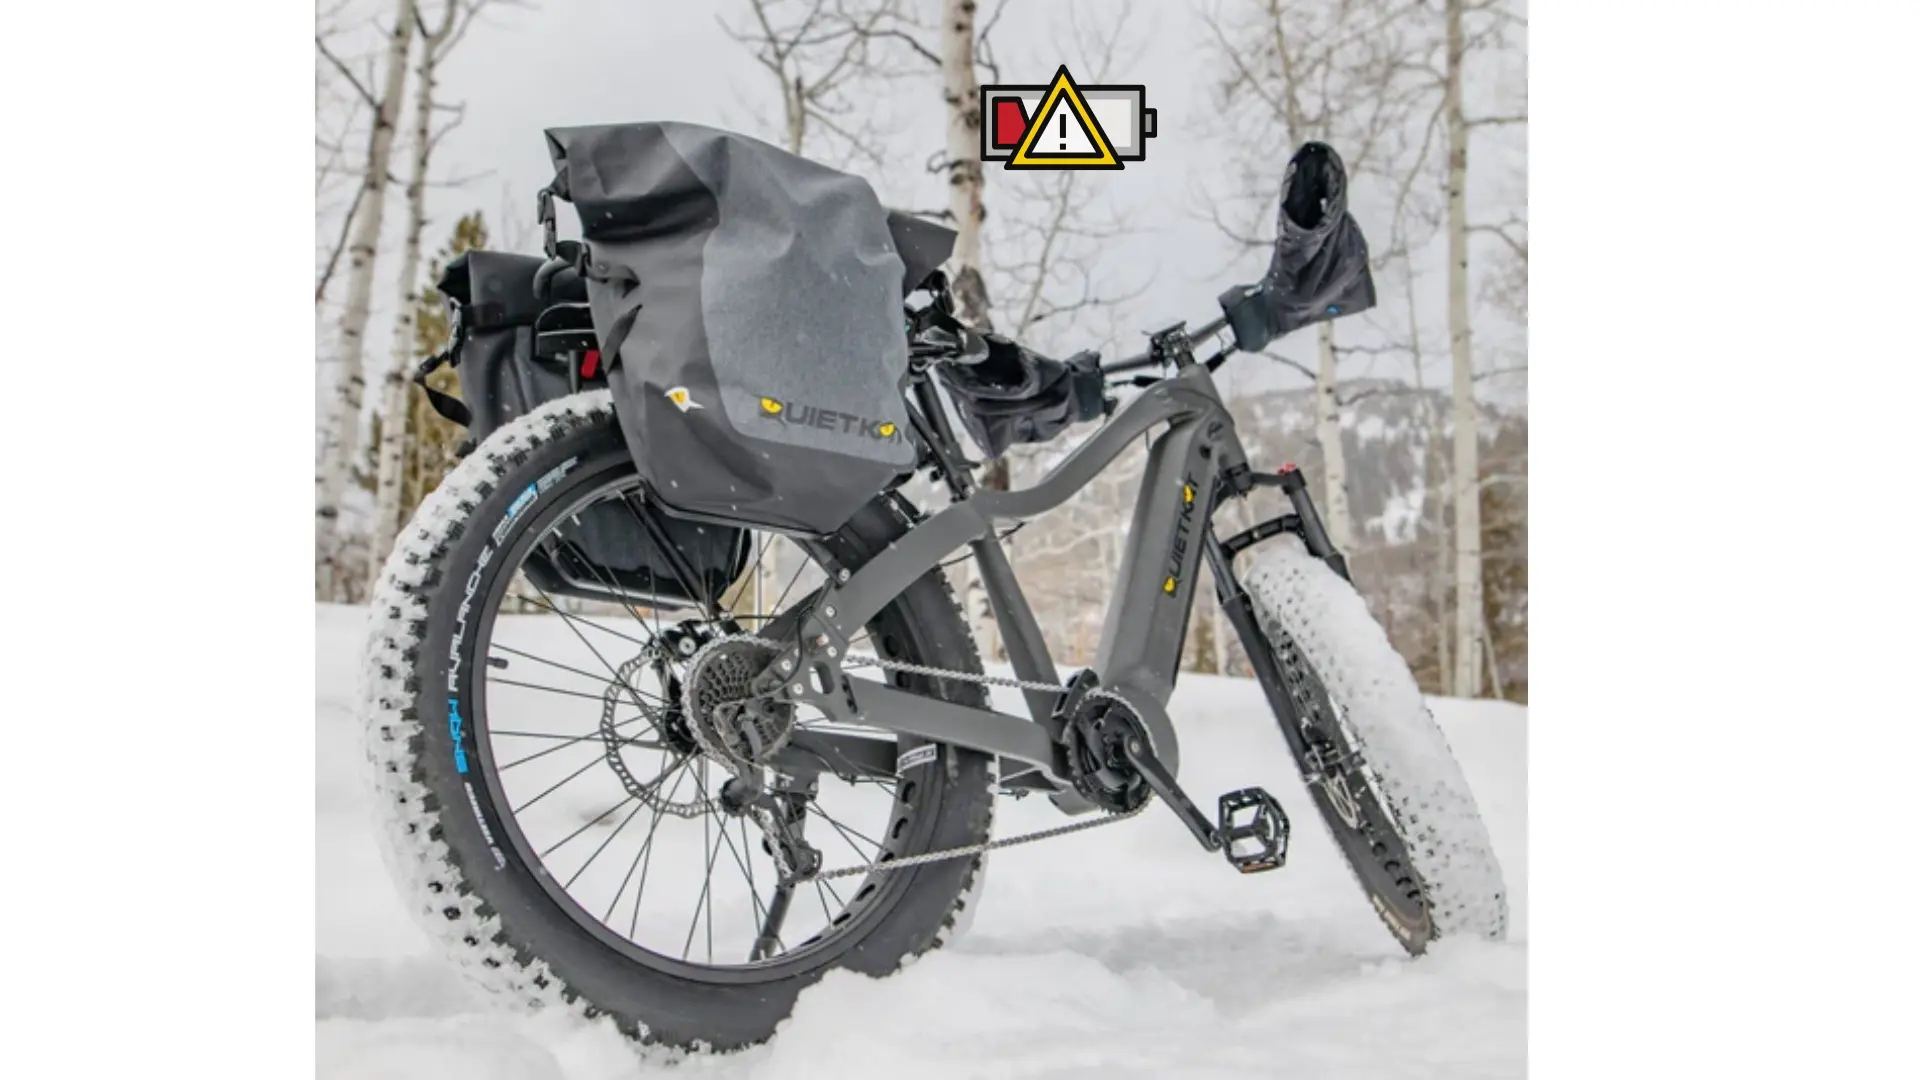 What Can You Do if Snow Is Likely To Touch Important Components of Your Ebike